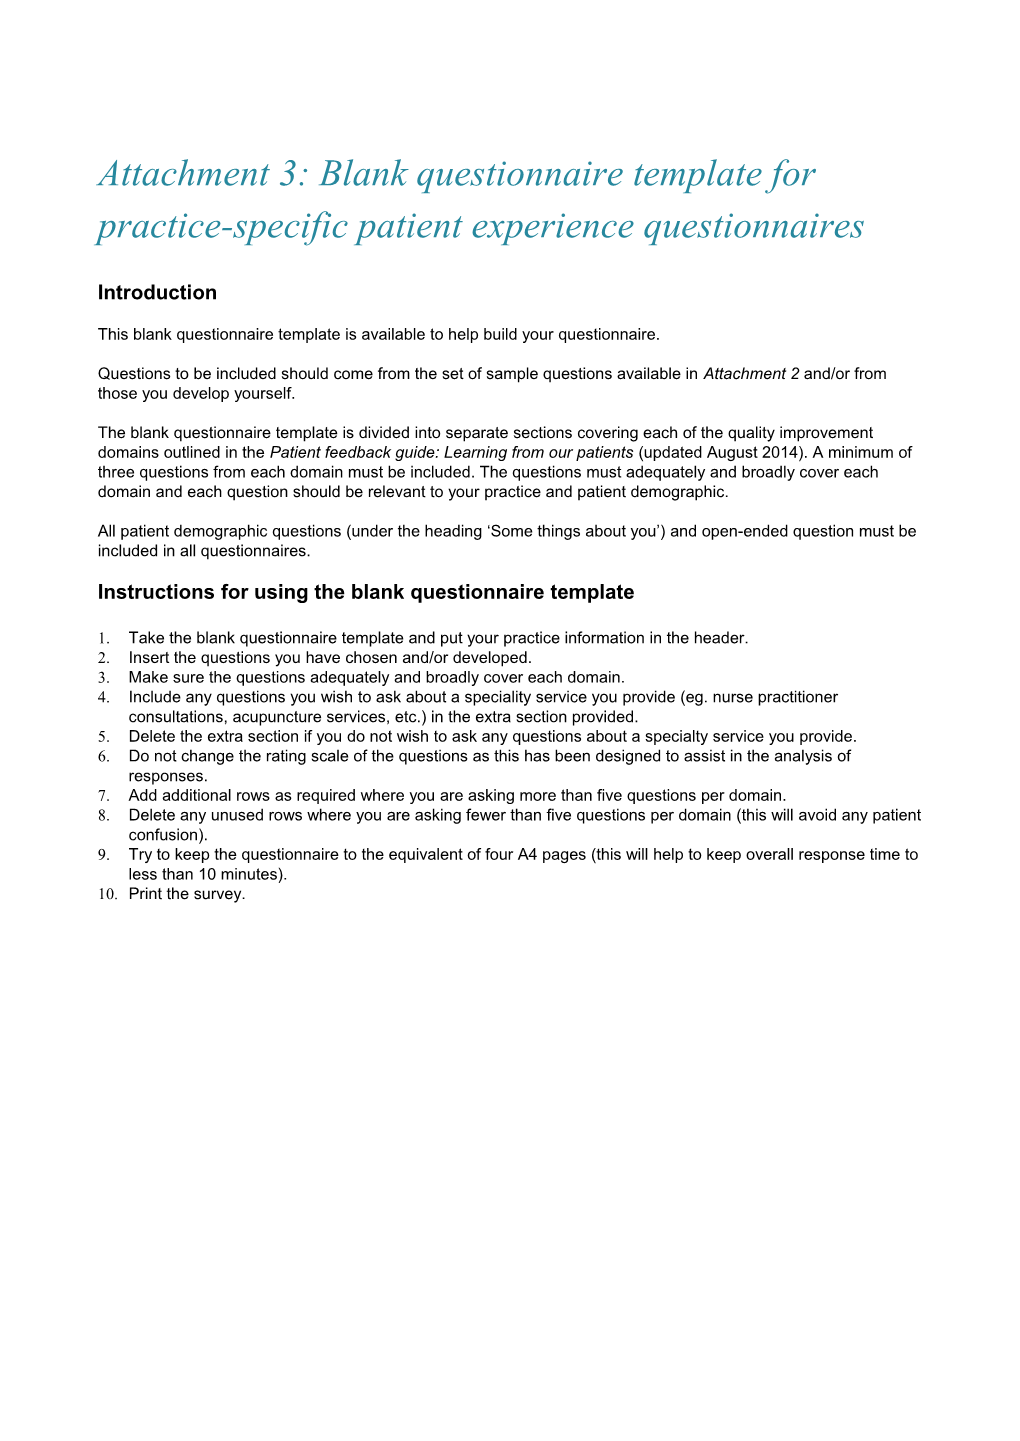 Attachment 3: Blank Questionnaire Template for Practice-Specific Patient Experience